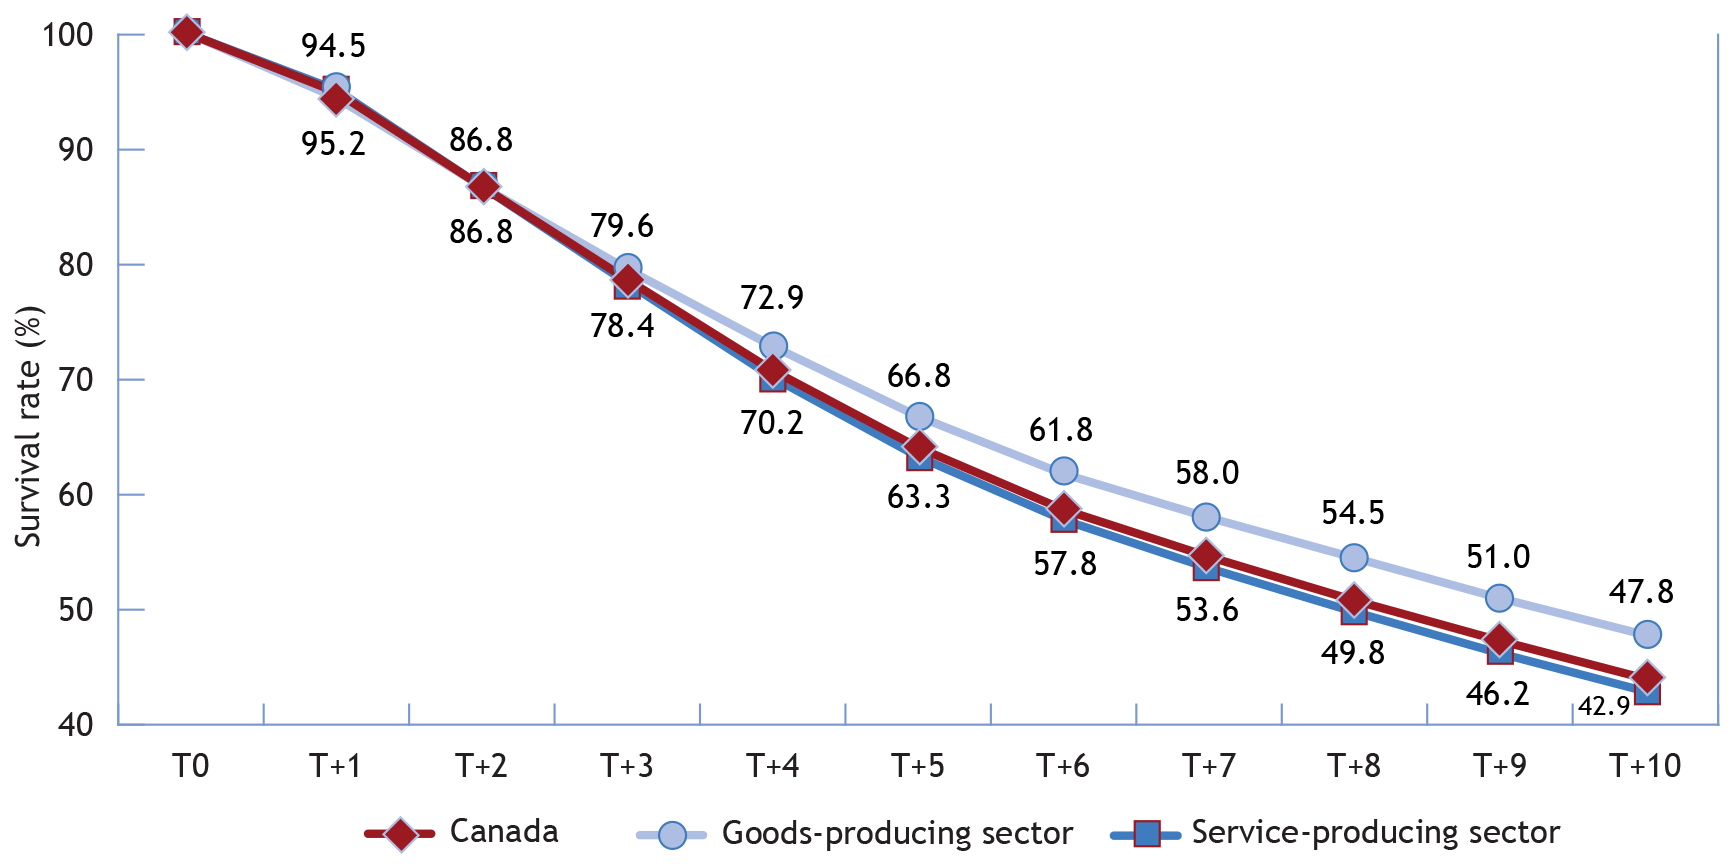 Multi-Line chart illustrating the survival rate of businesses with one or more employees, Canada (the long description is located below the image)